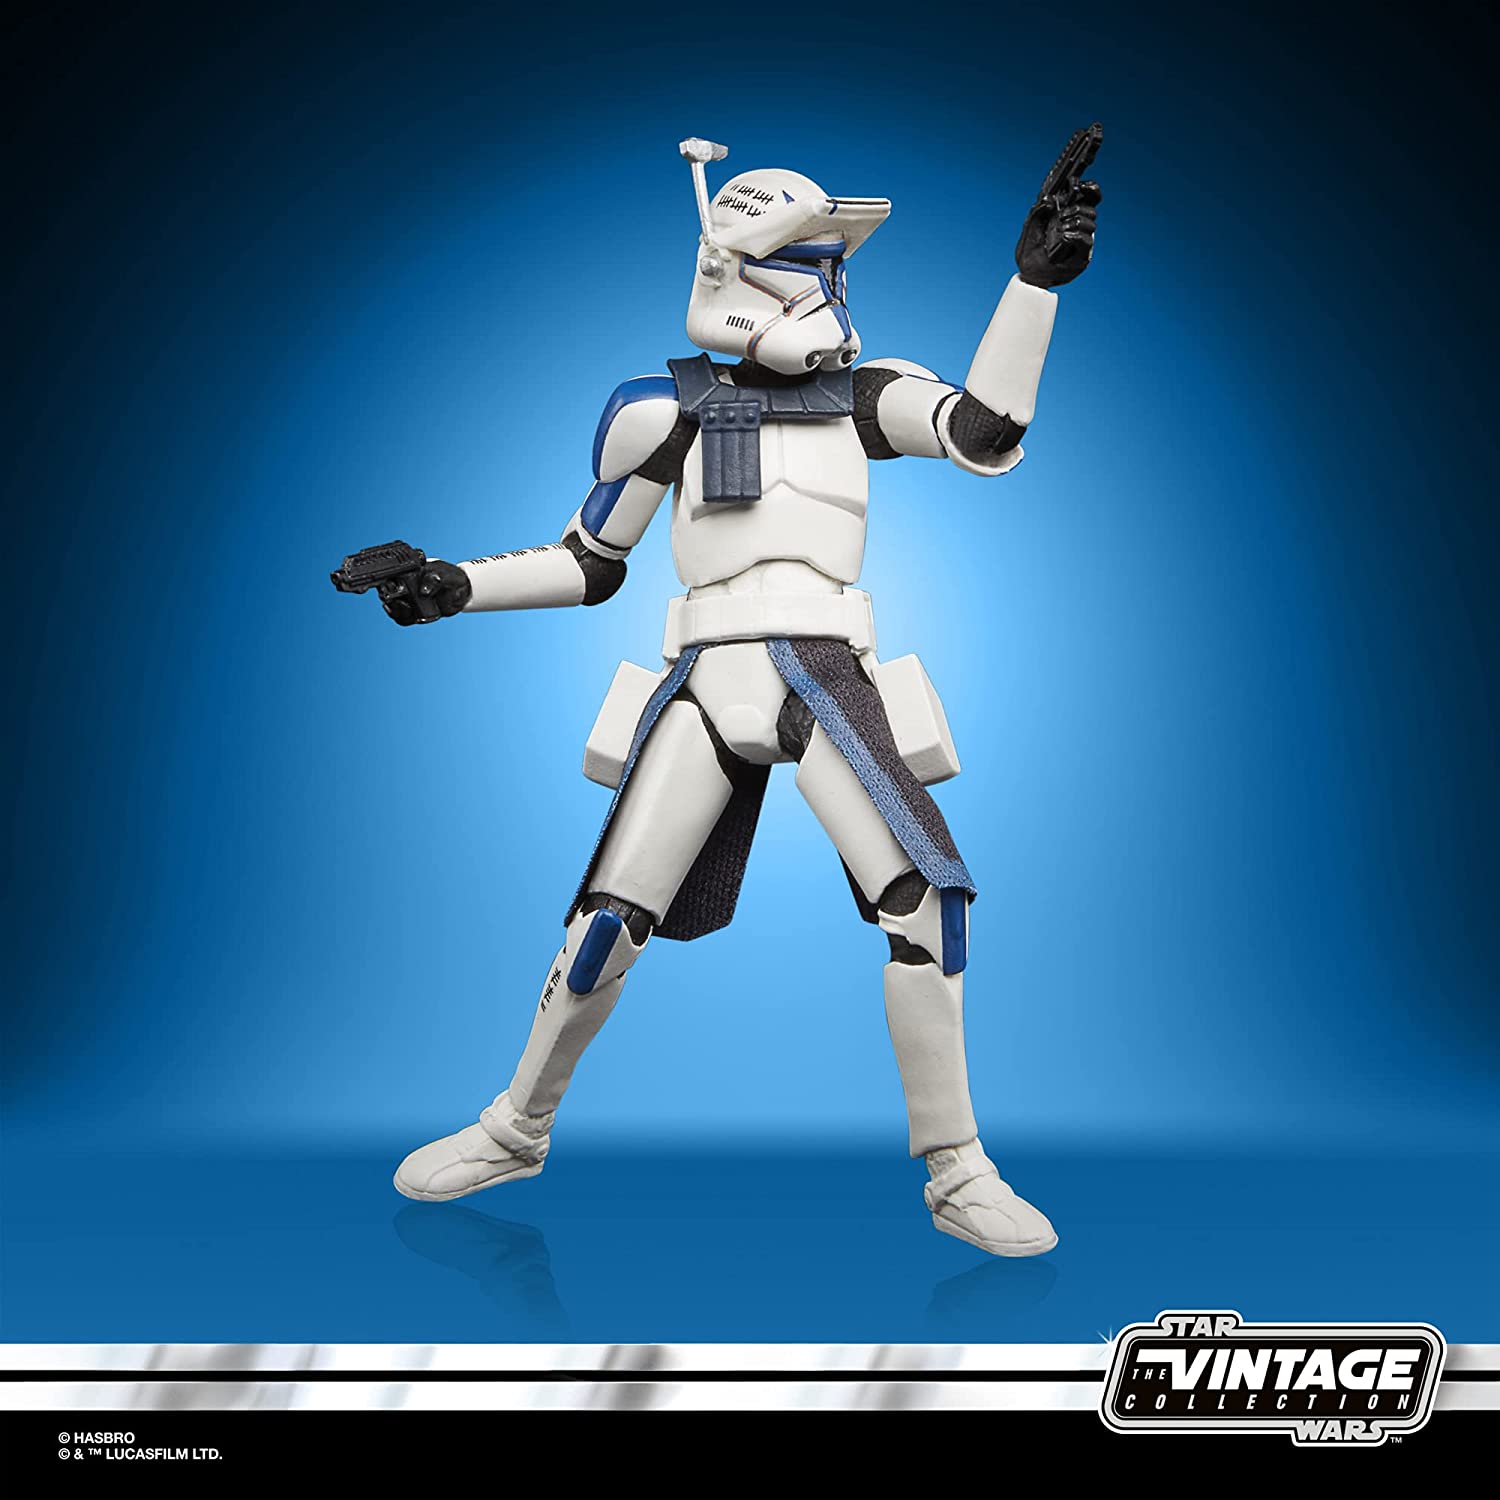 Pack Deluxe Troopers - The Vintage Collection